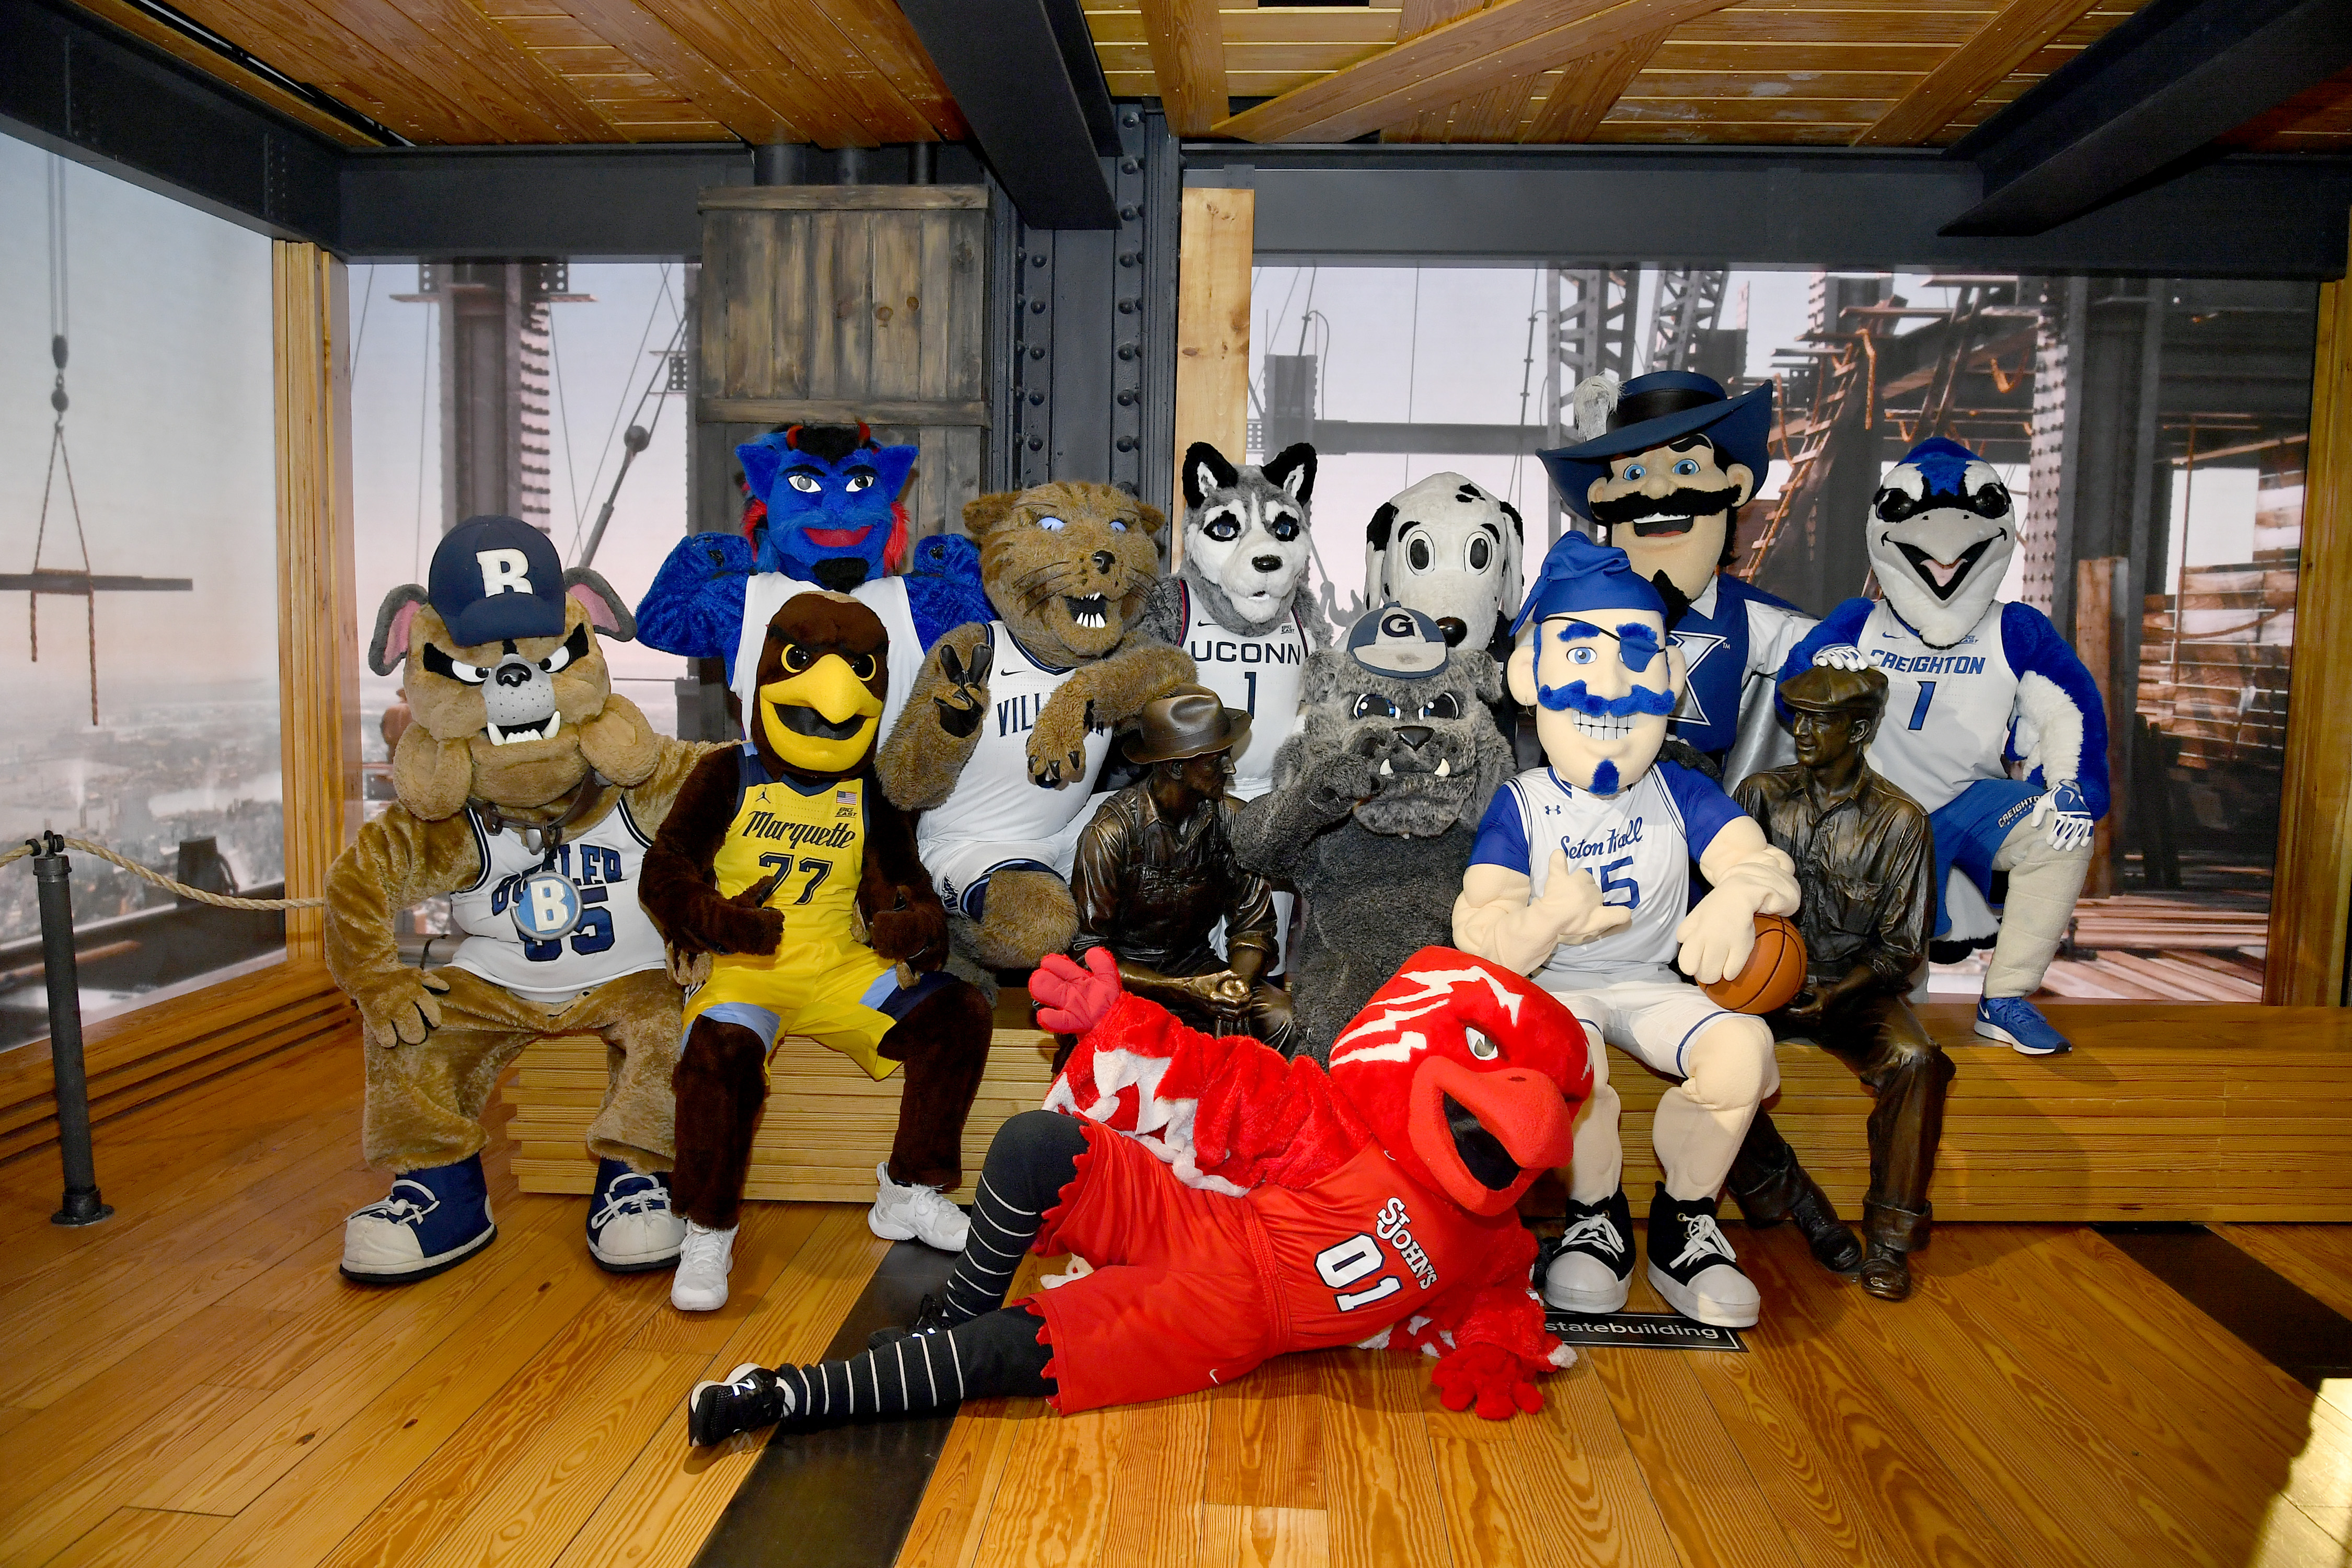 BIG EAST Mascots visit the Empire State Building in Advance of the Tournament...